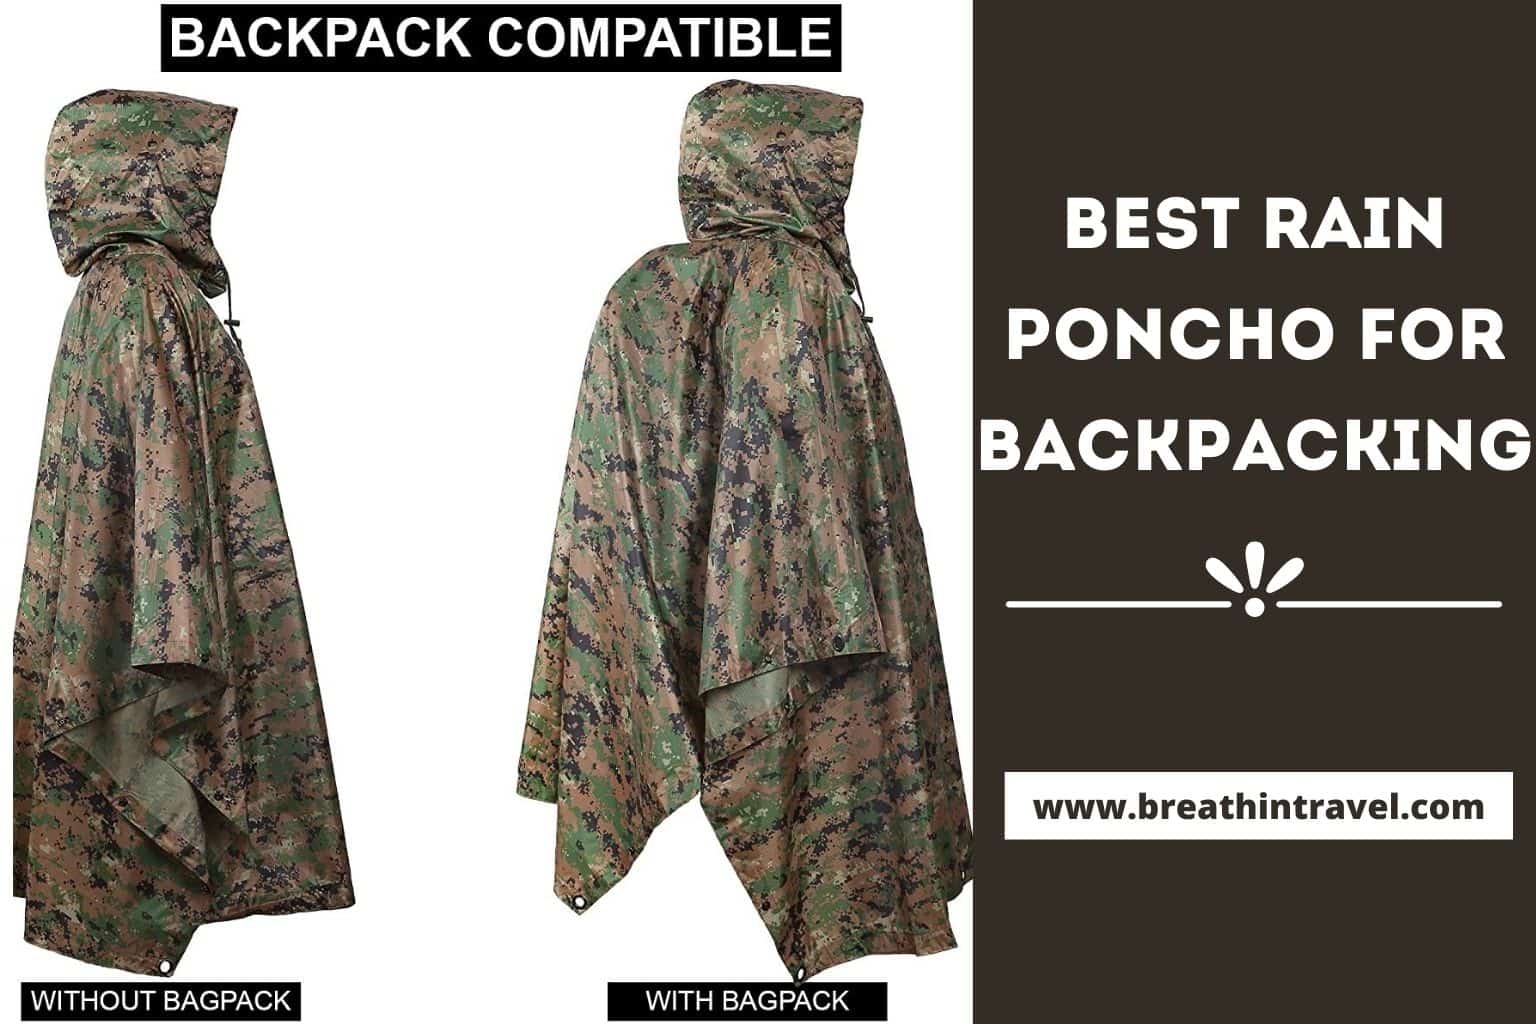 Best Rain Poncho for Backpacking | Lightweight + Durable